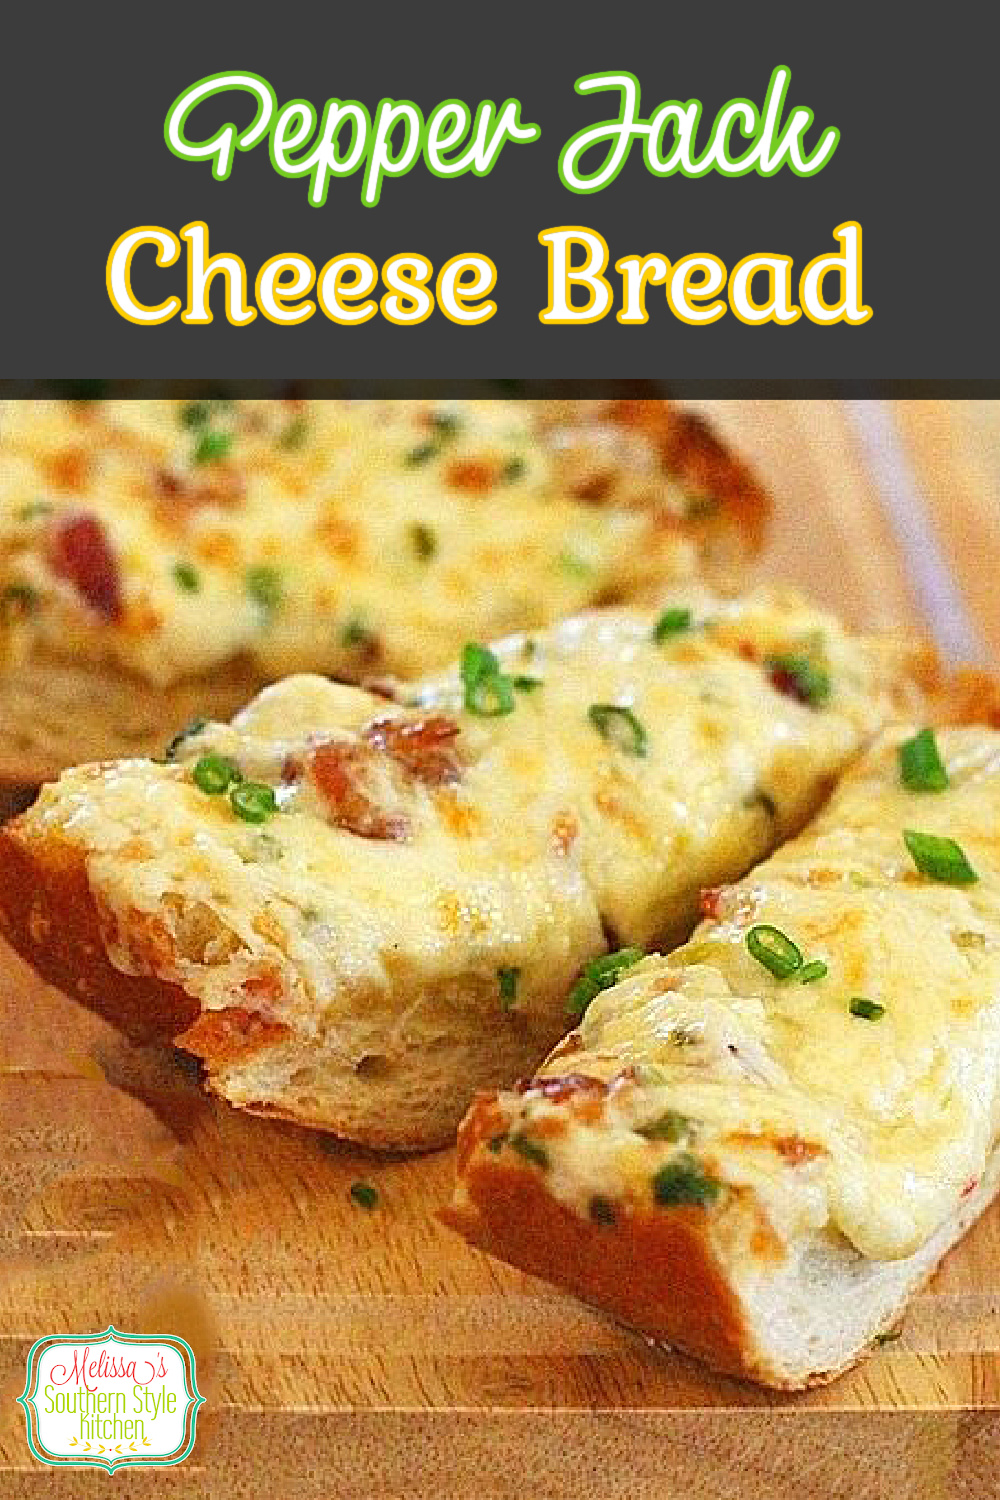 Pepper Jack Cheese Bread with Bacon And Jalapenos #bread #cheesebread #breadrecipes #appetizers #footballfood #partyfood #jalapenos #bacon #garlicbread #superbowlrecipes #recipes #food #easyrecipes #sidedish #melissassouthernstylekitchen